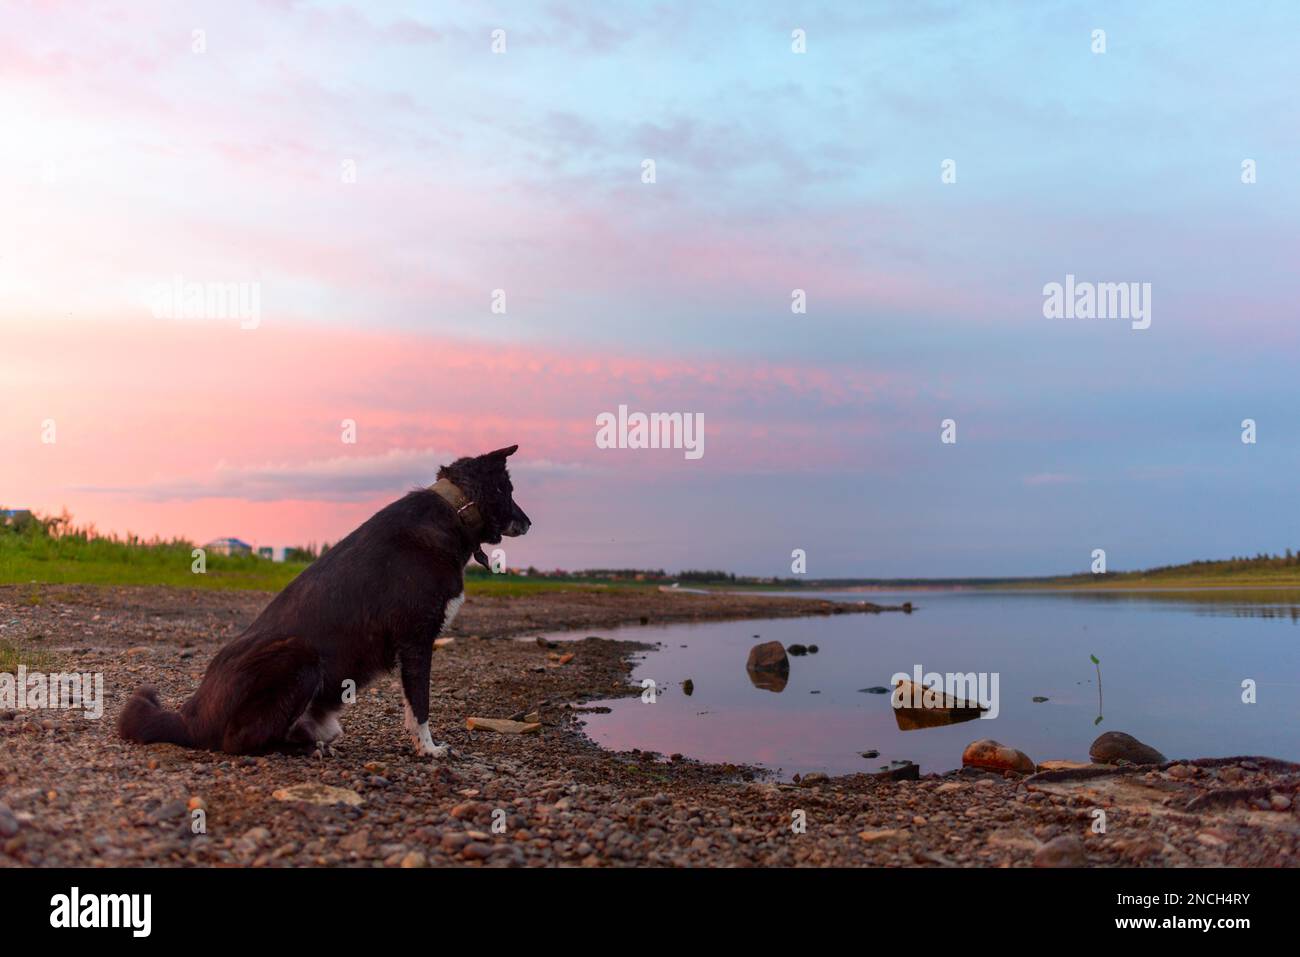 The black dog alonesits on the shore and looks at the river at sunset in the evening in Yakutia in Siberia. Stock Photo